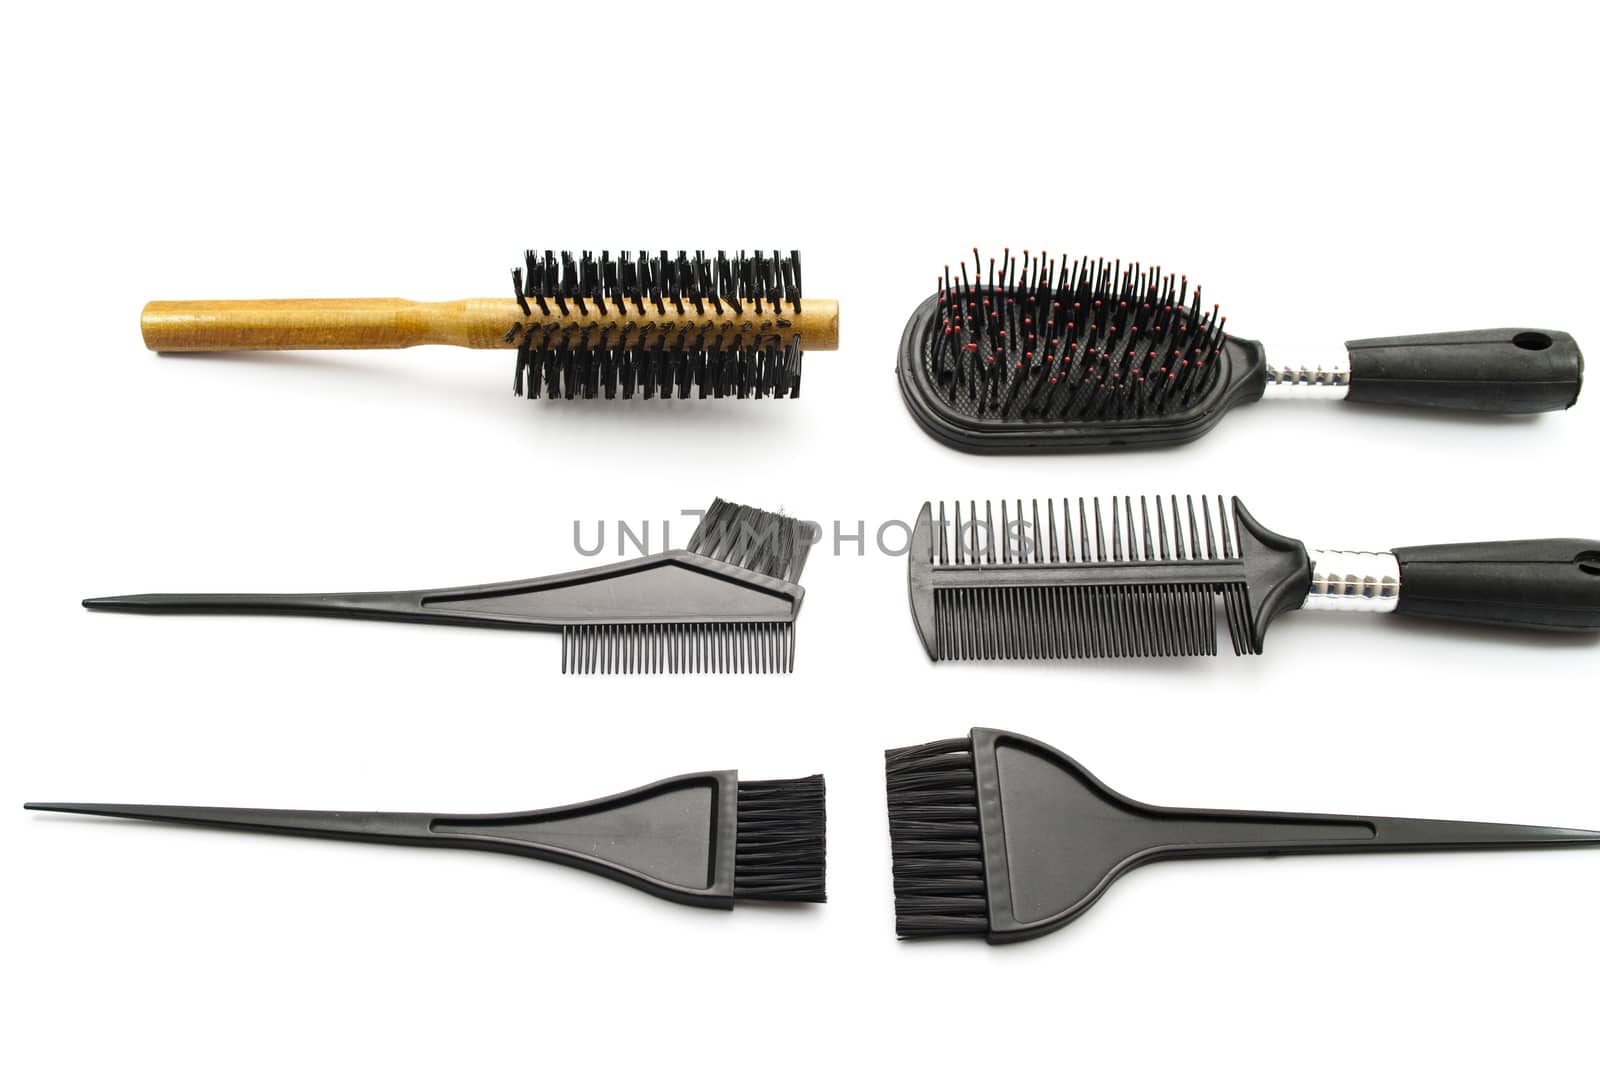 Different Hairbrush on white background